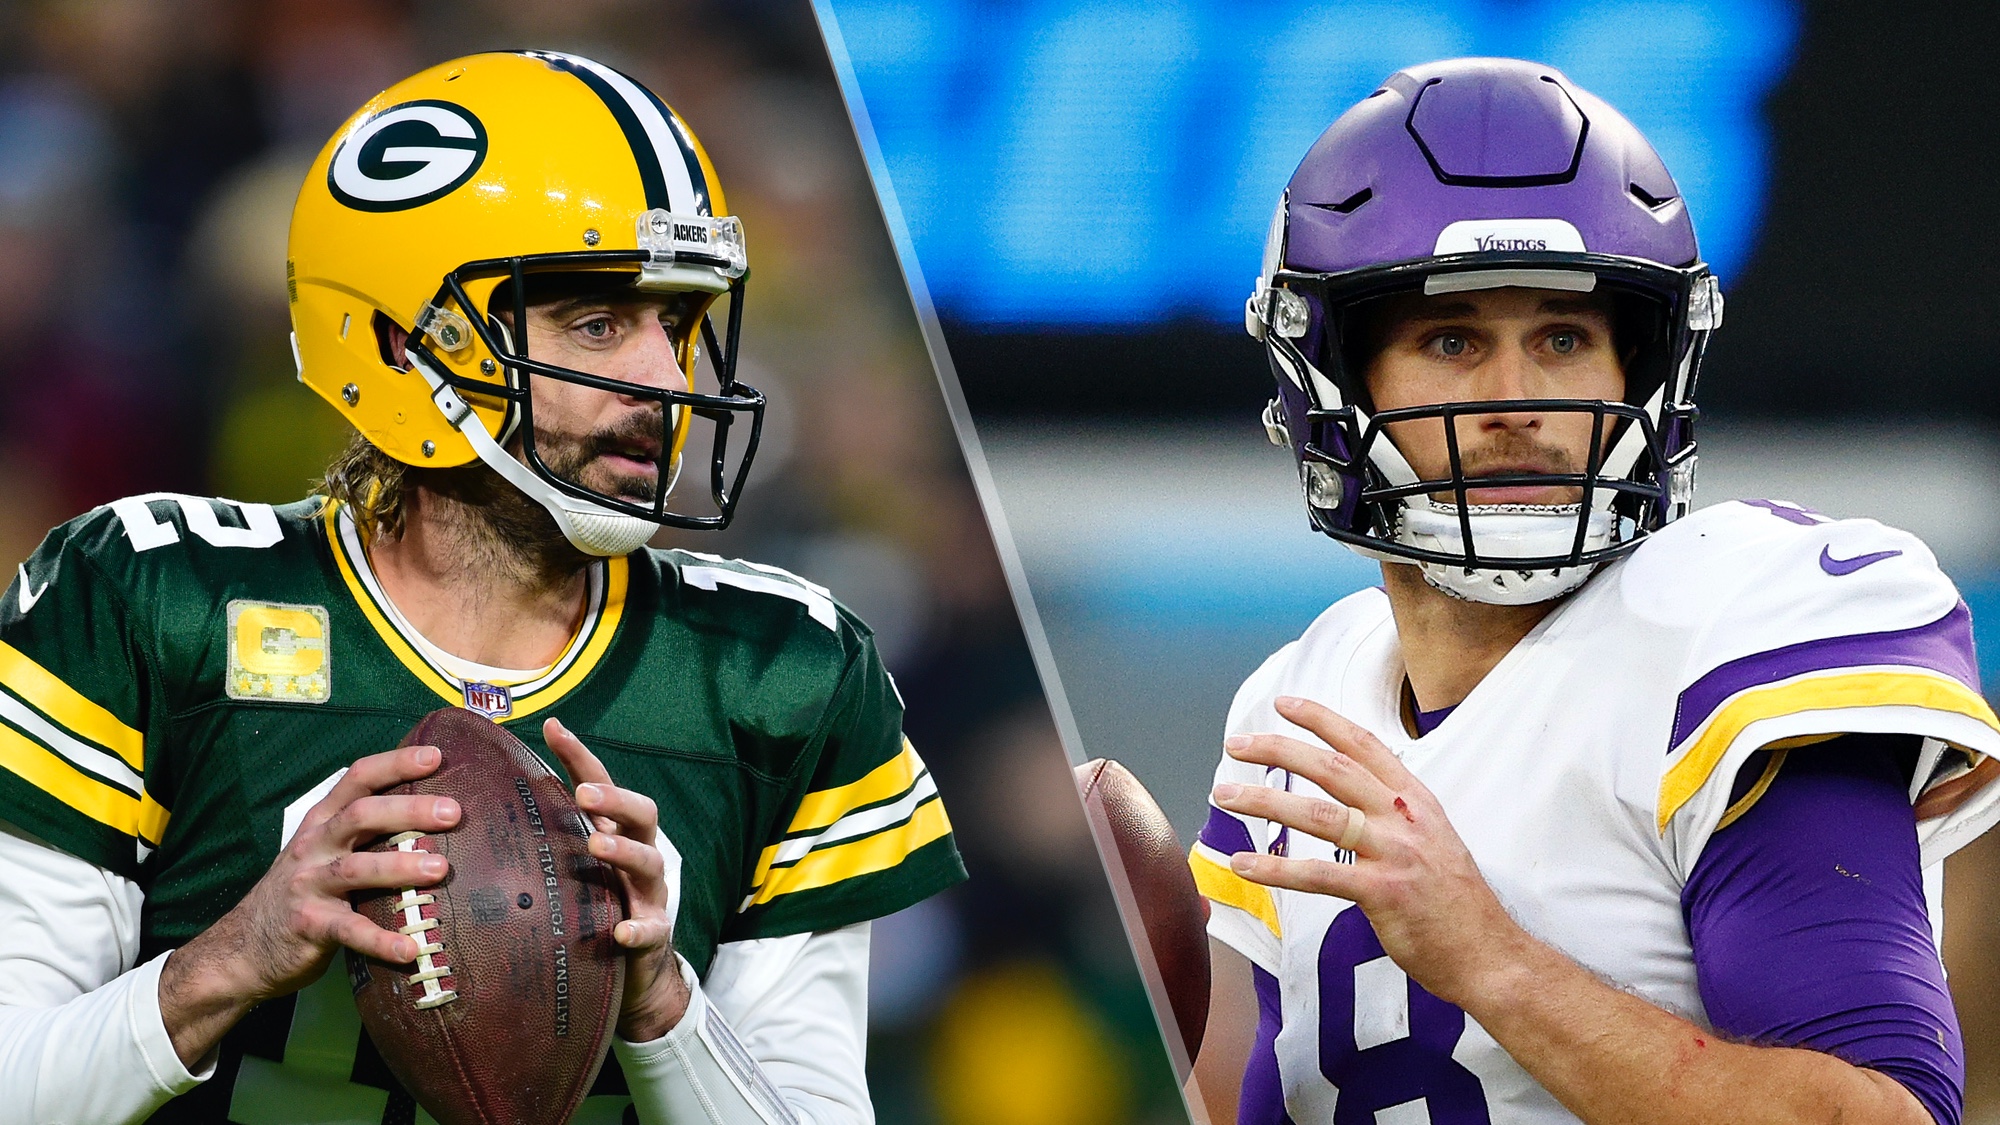 Packers vs Vikings live stream is today: How to watch NFL Week 11